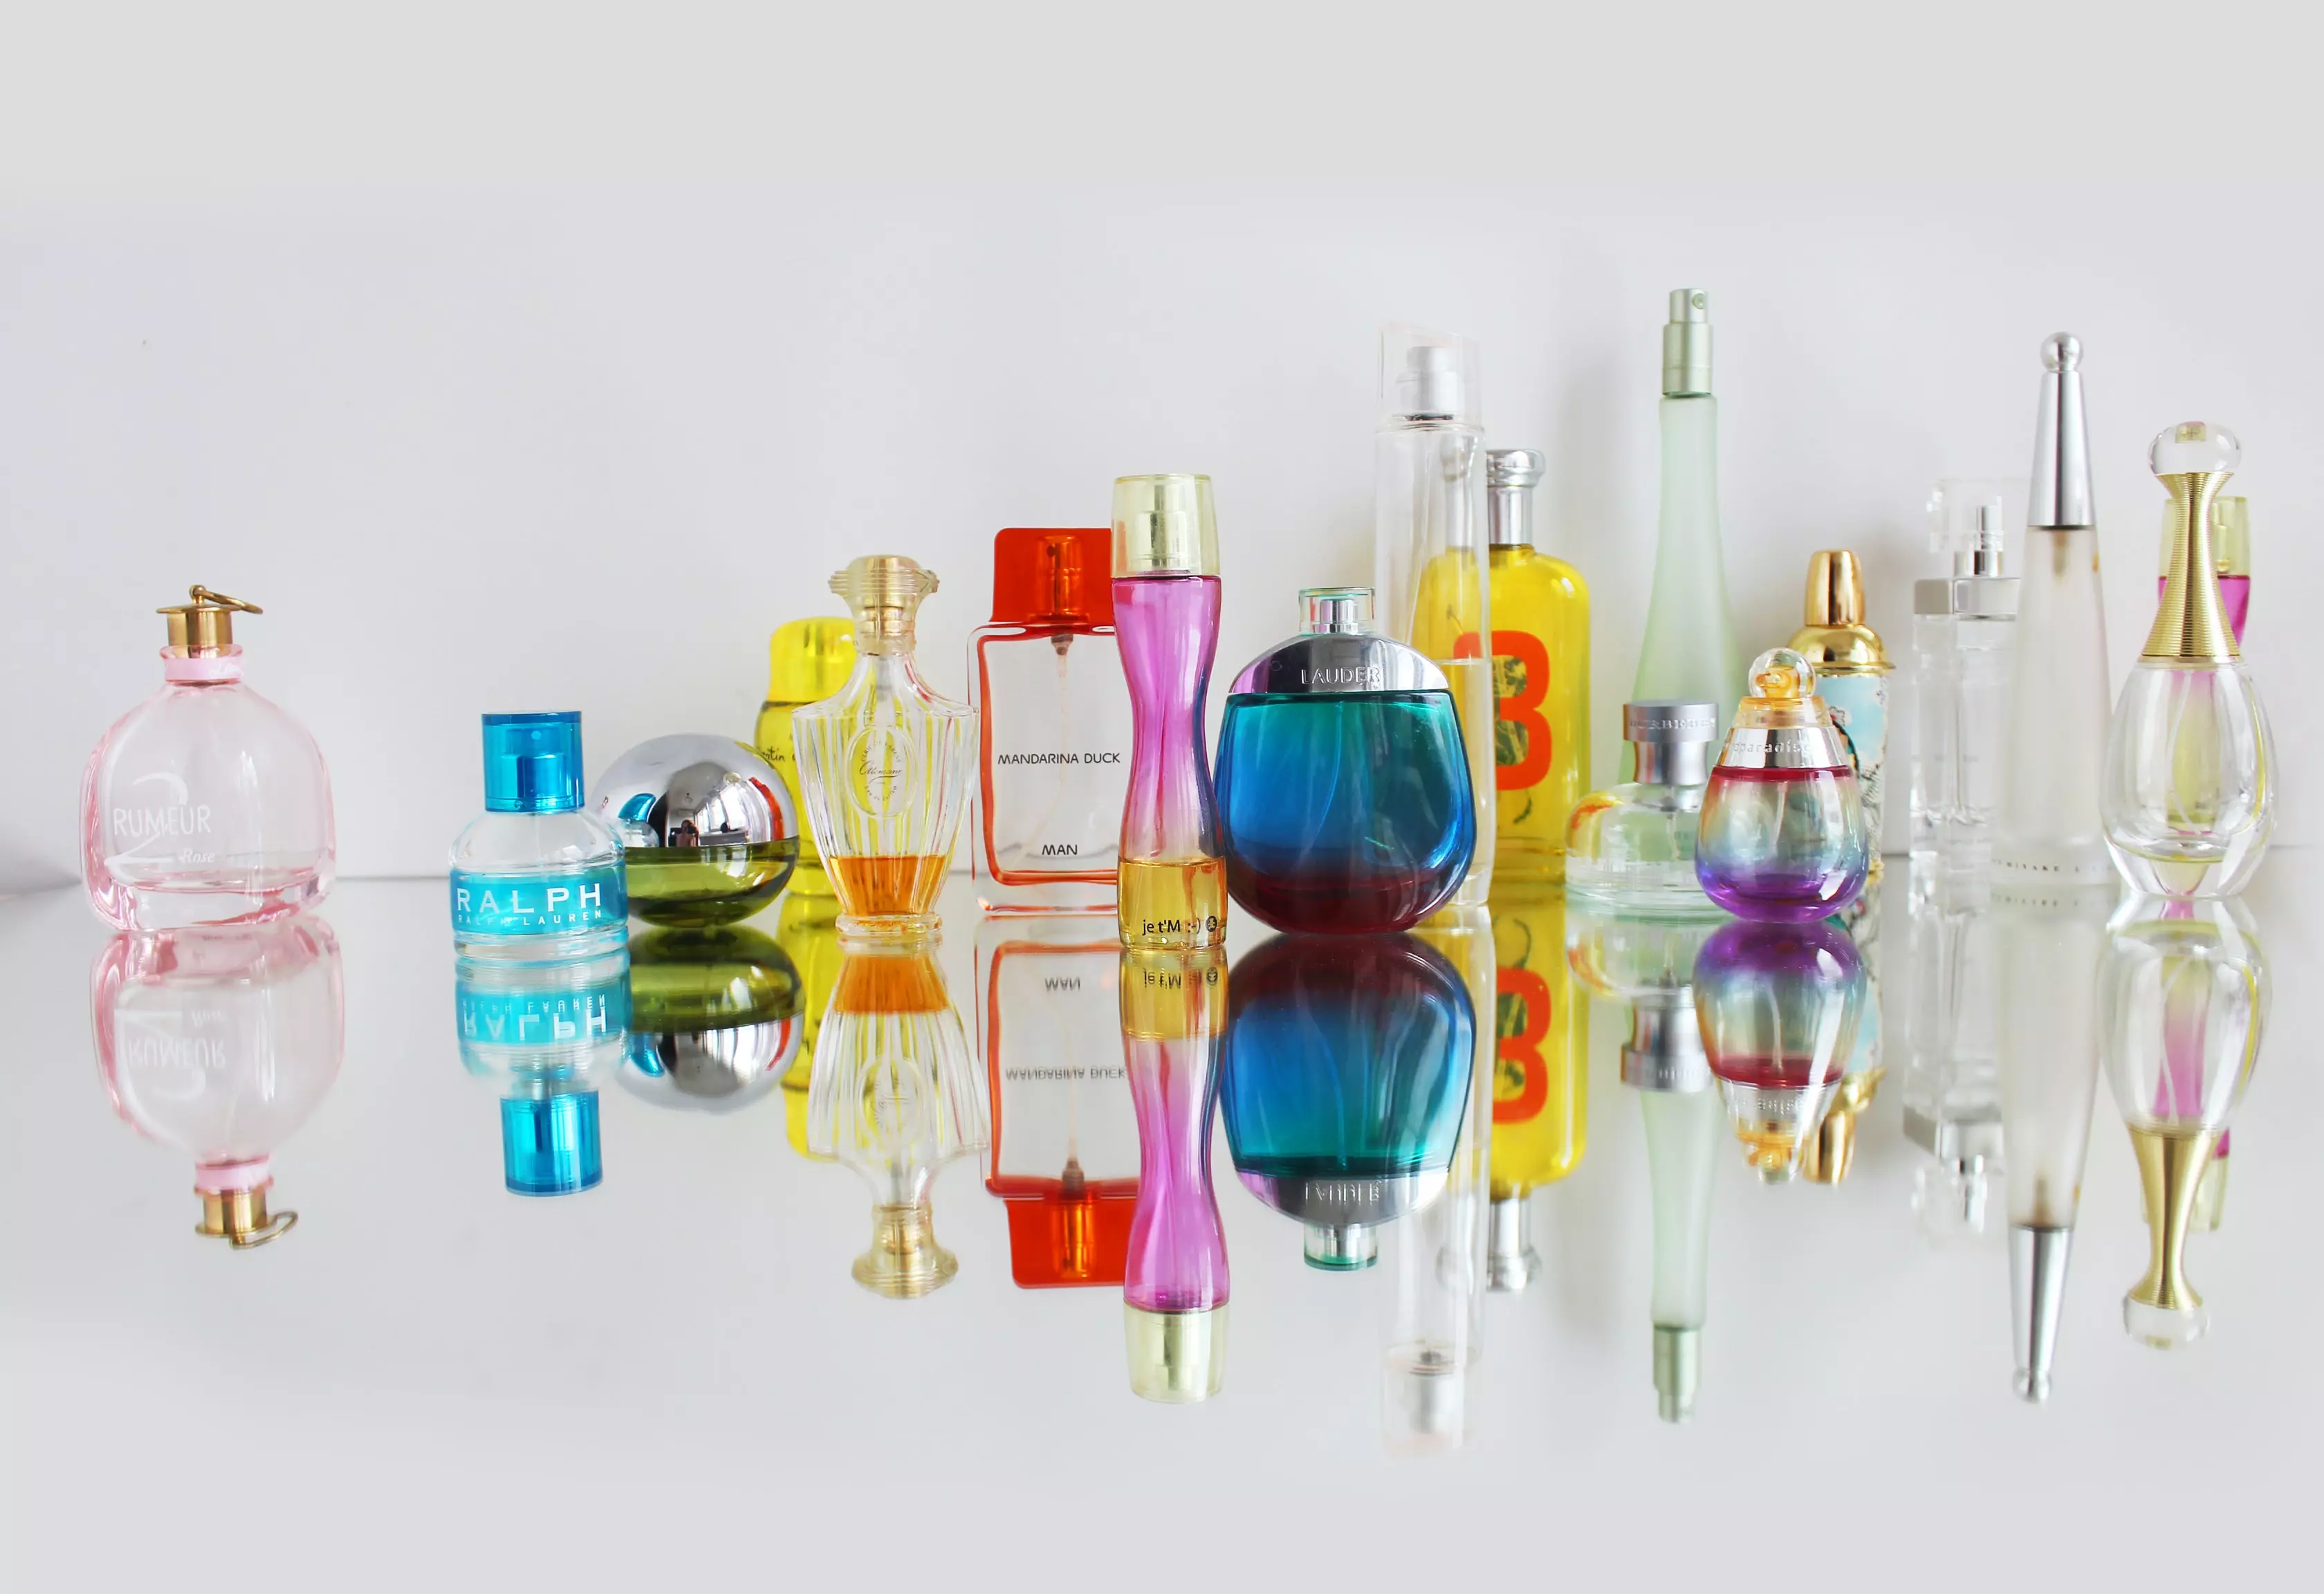 the perfume and fragrance market